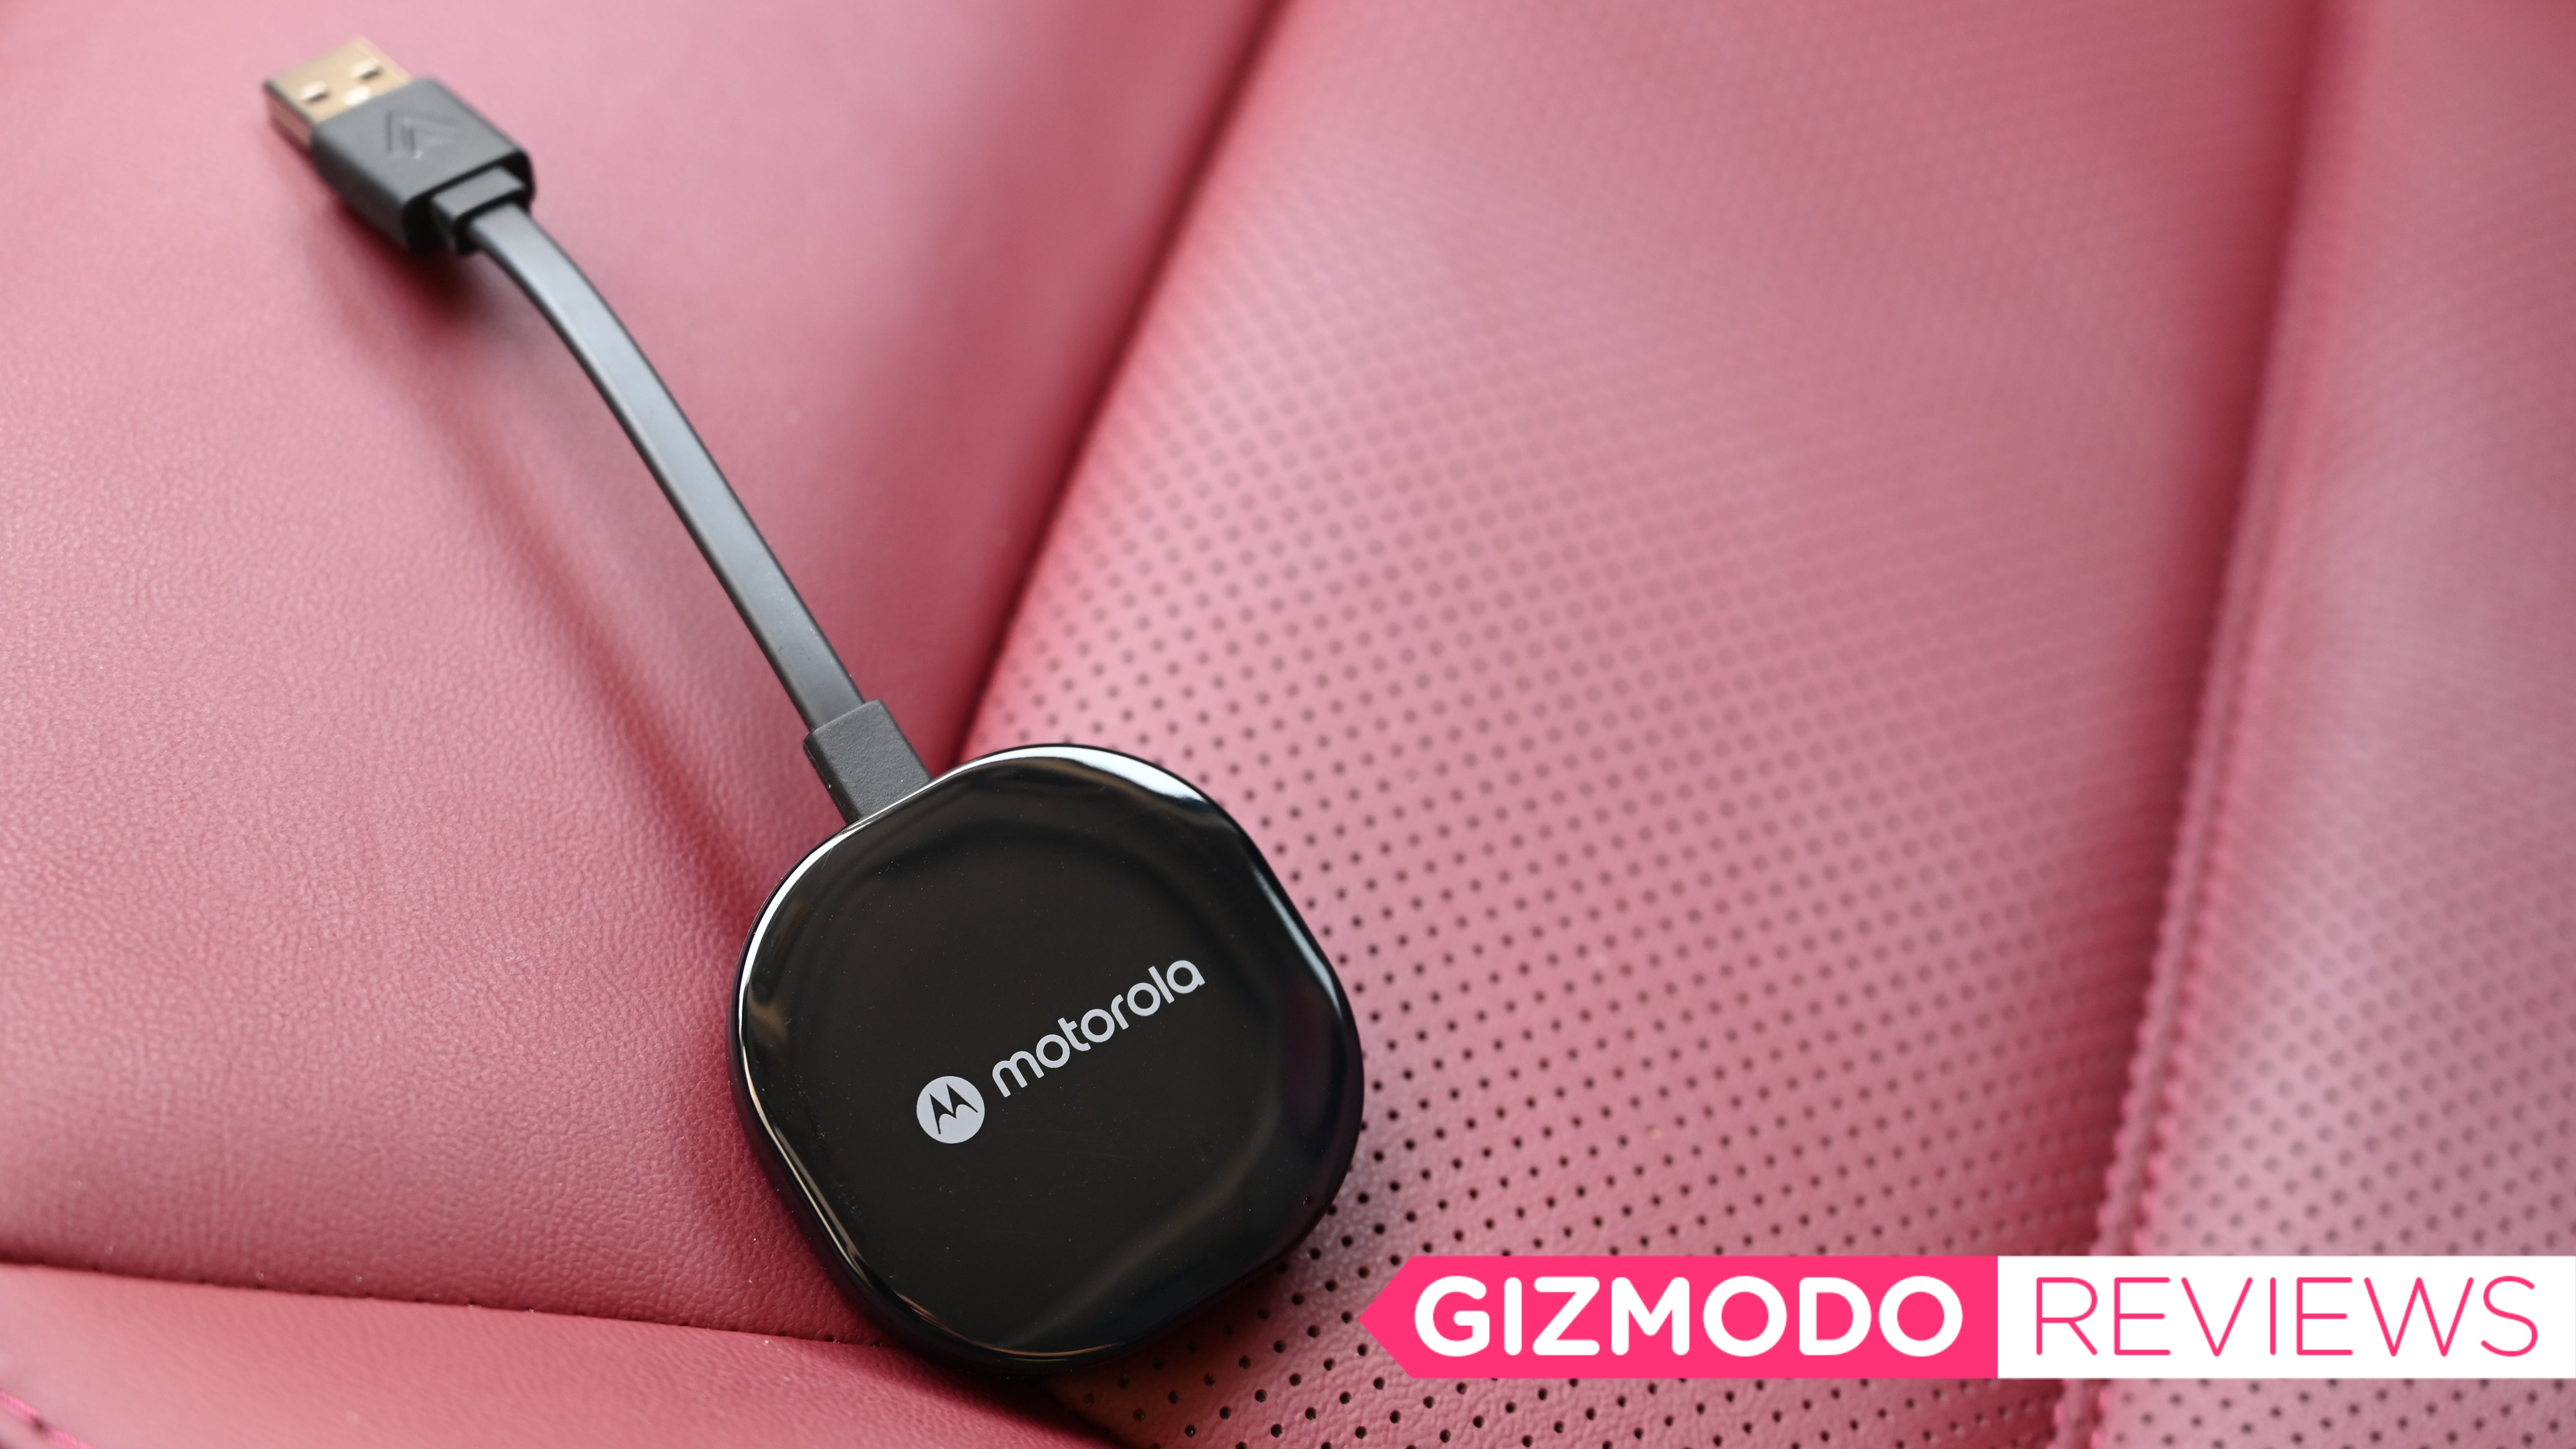 Motorola MA1 adds wireless Android Auto to cars, launches in Australia